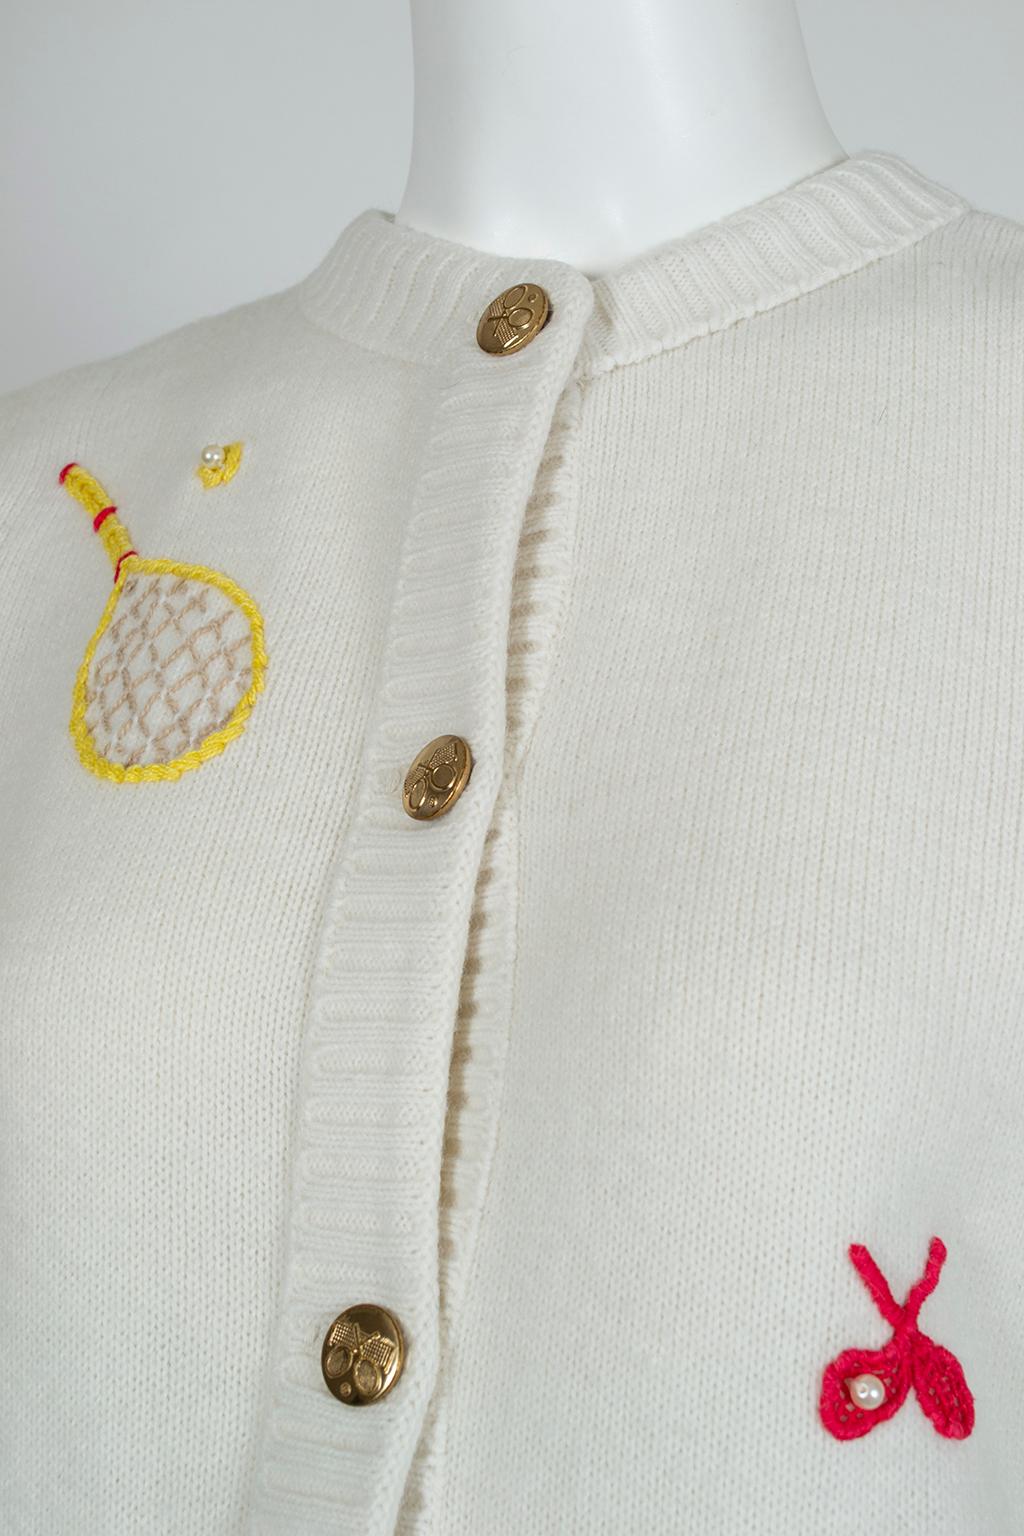 Gray Tennis is my Racquet Ivory Novelty Appliqué Cardigan Sweater - M-L, 1960s